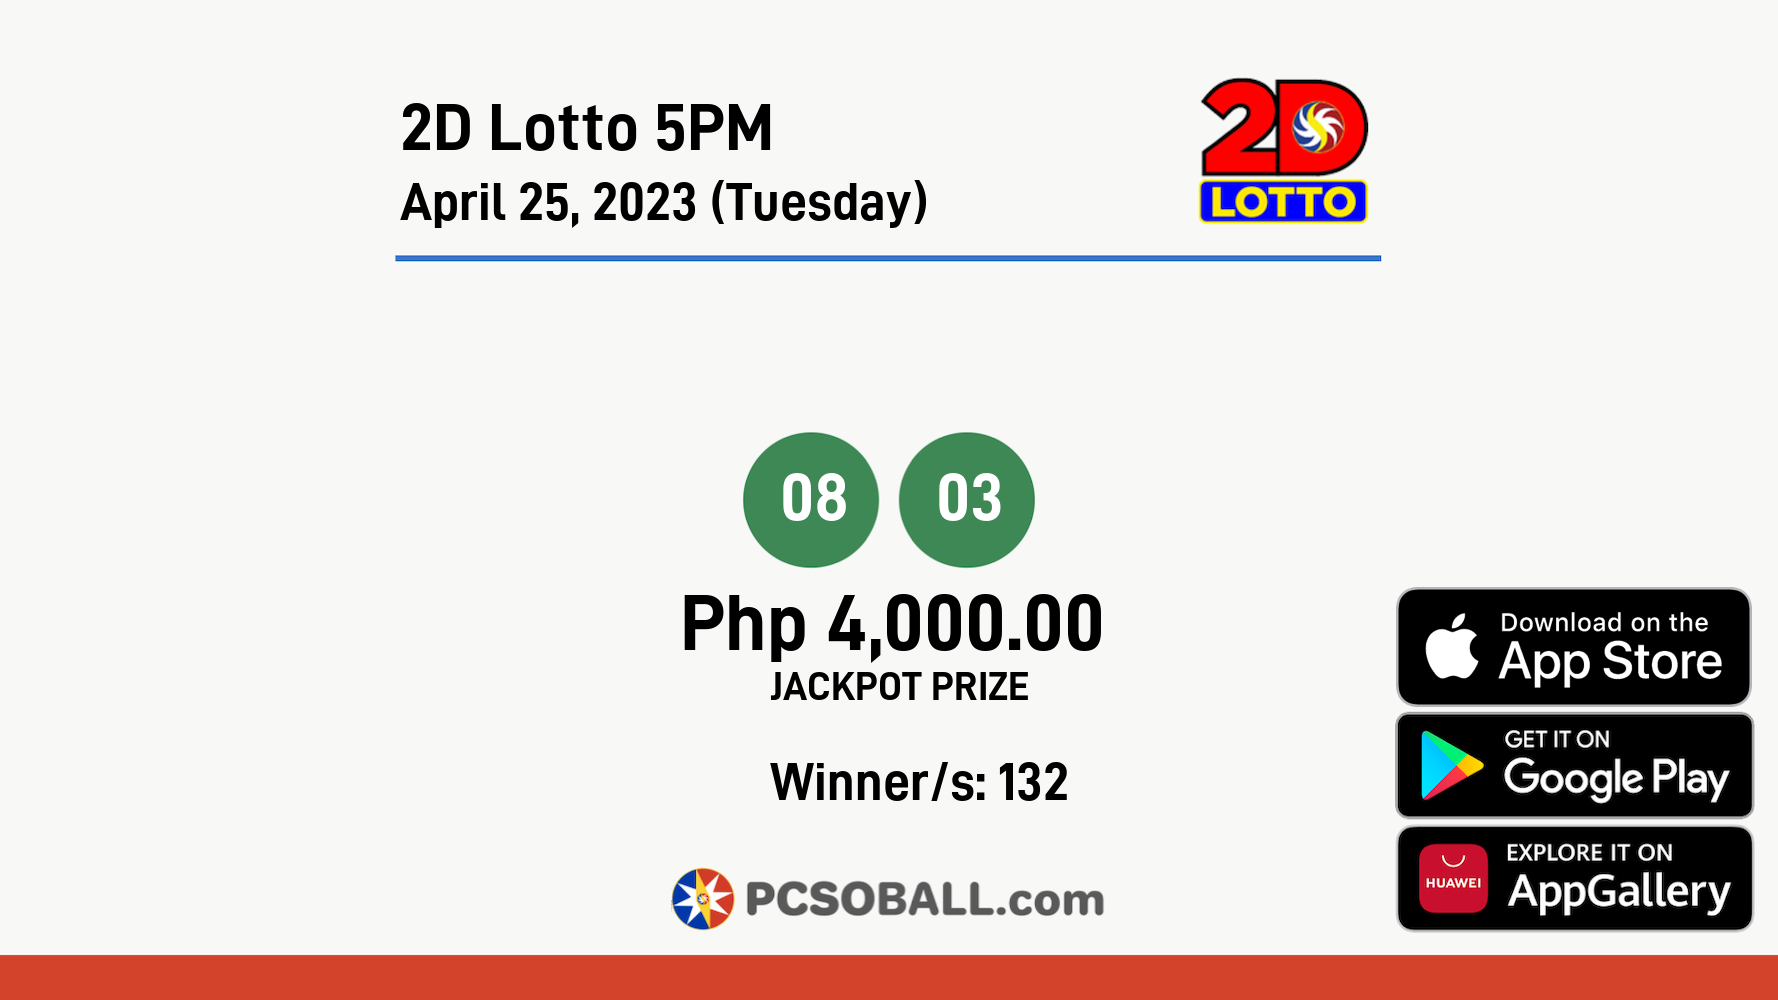 2D Lotto 5PM April 25, 2023 (Tuesday) Result